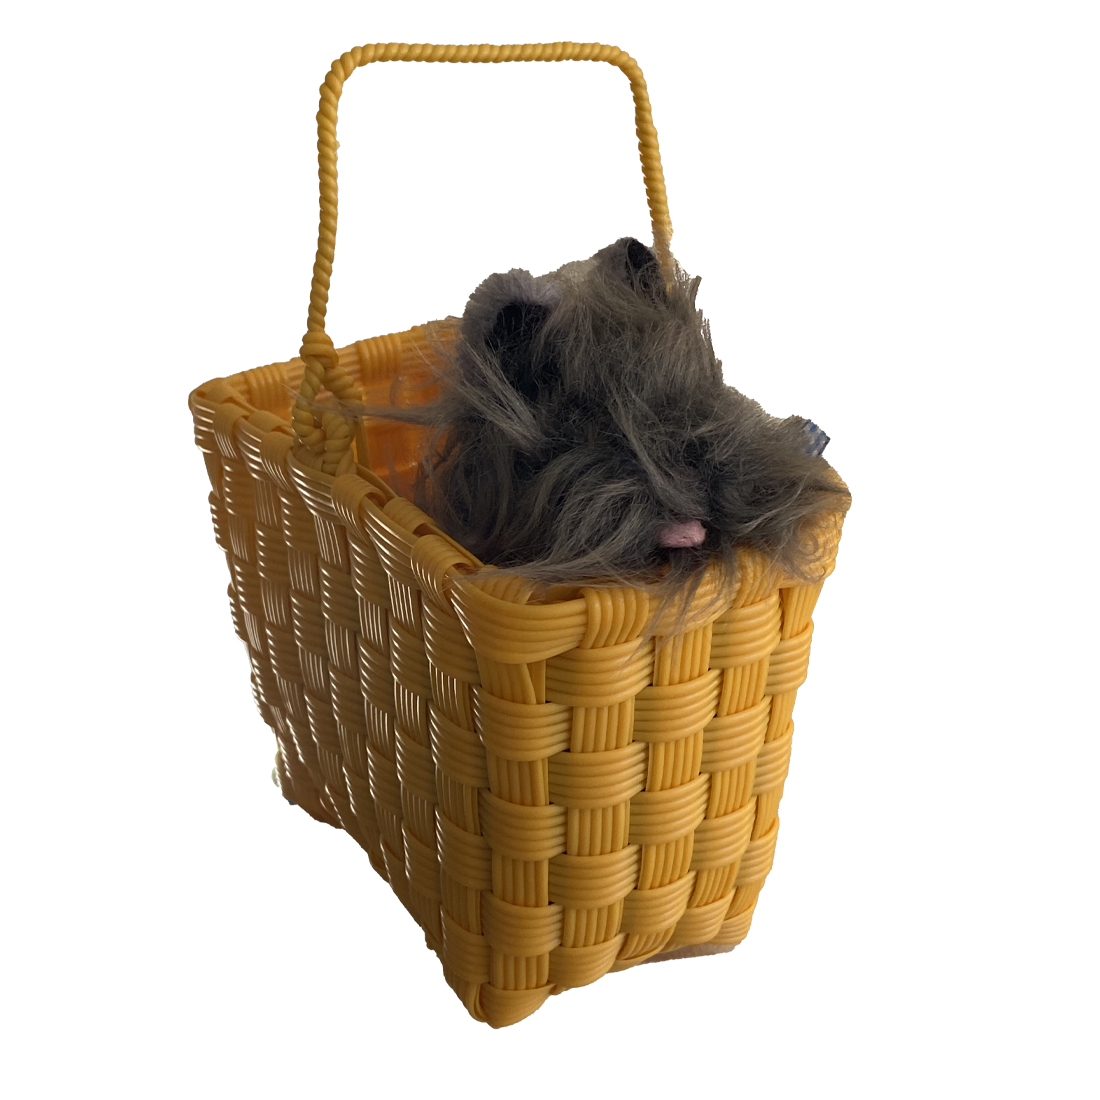 The Wizard of Oz Toto in a Basket